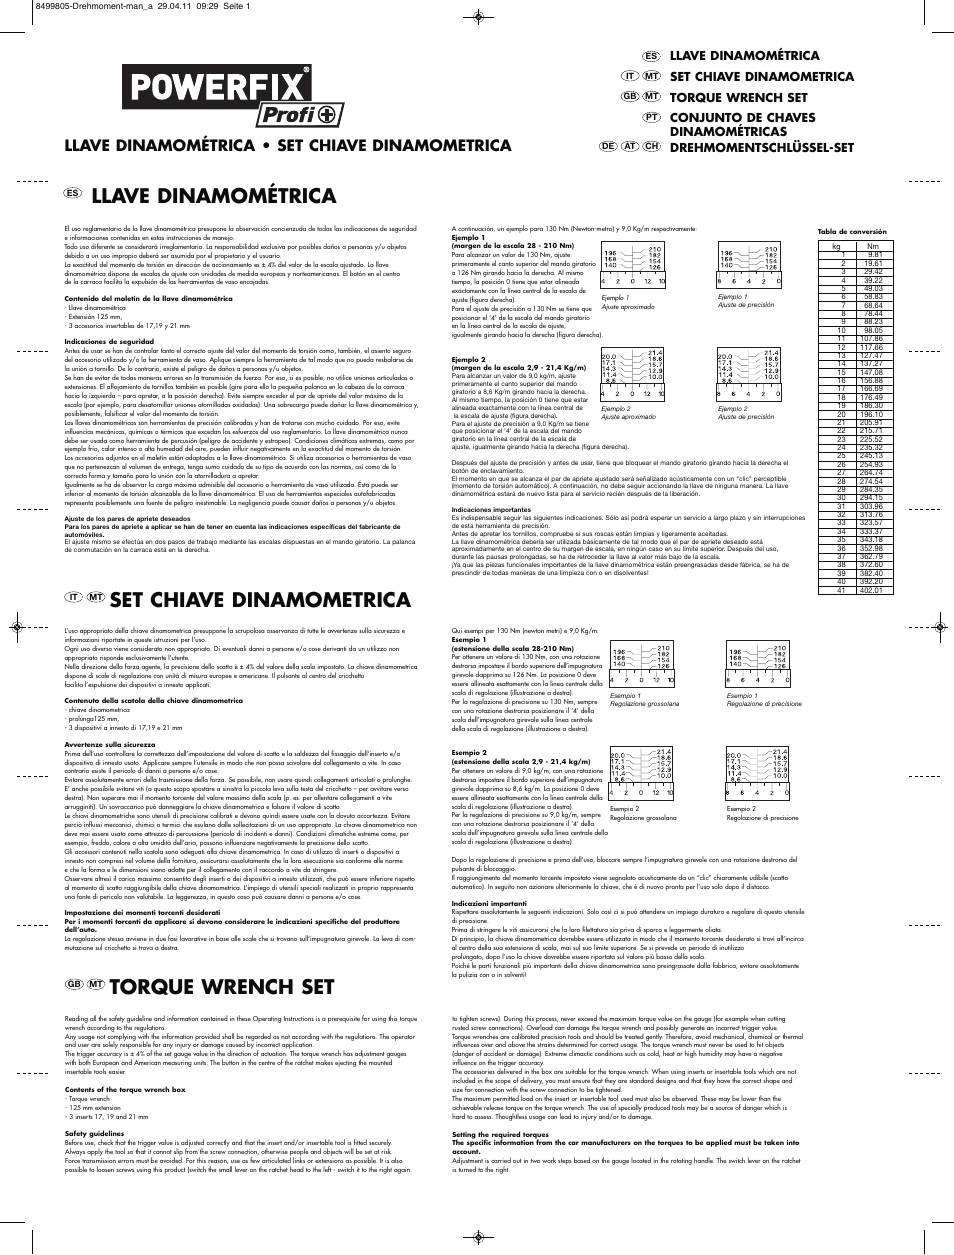 Powerfix Torque Wrench Set User Manual | 2 pages